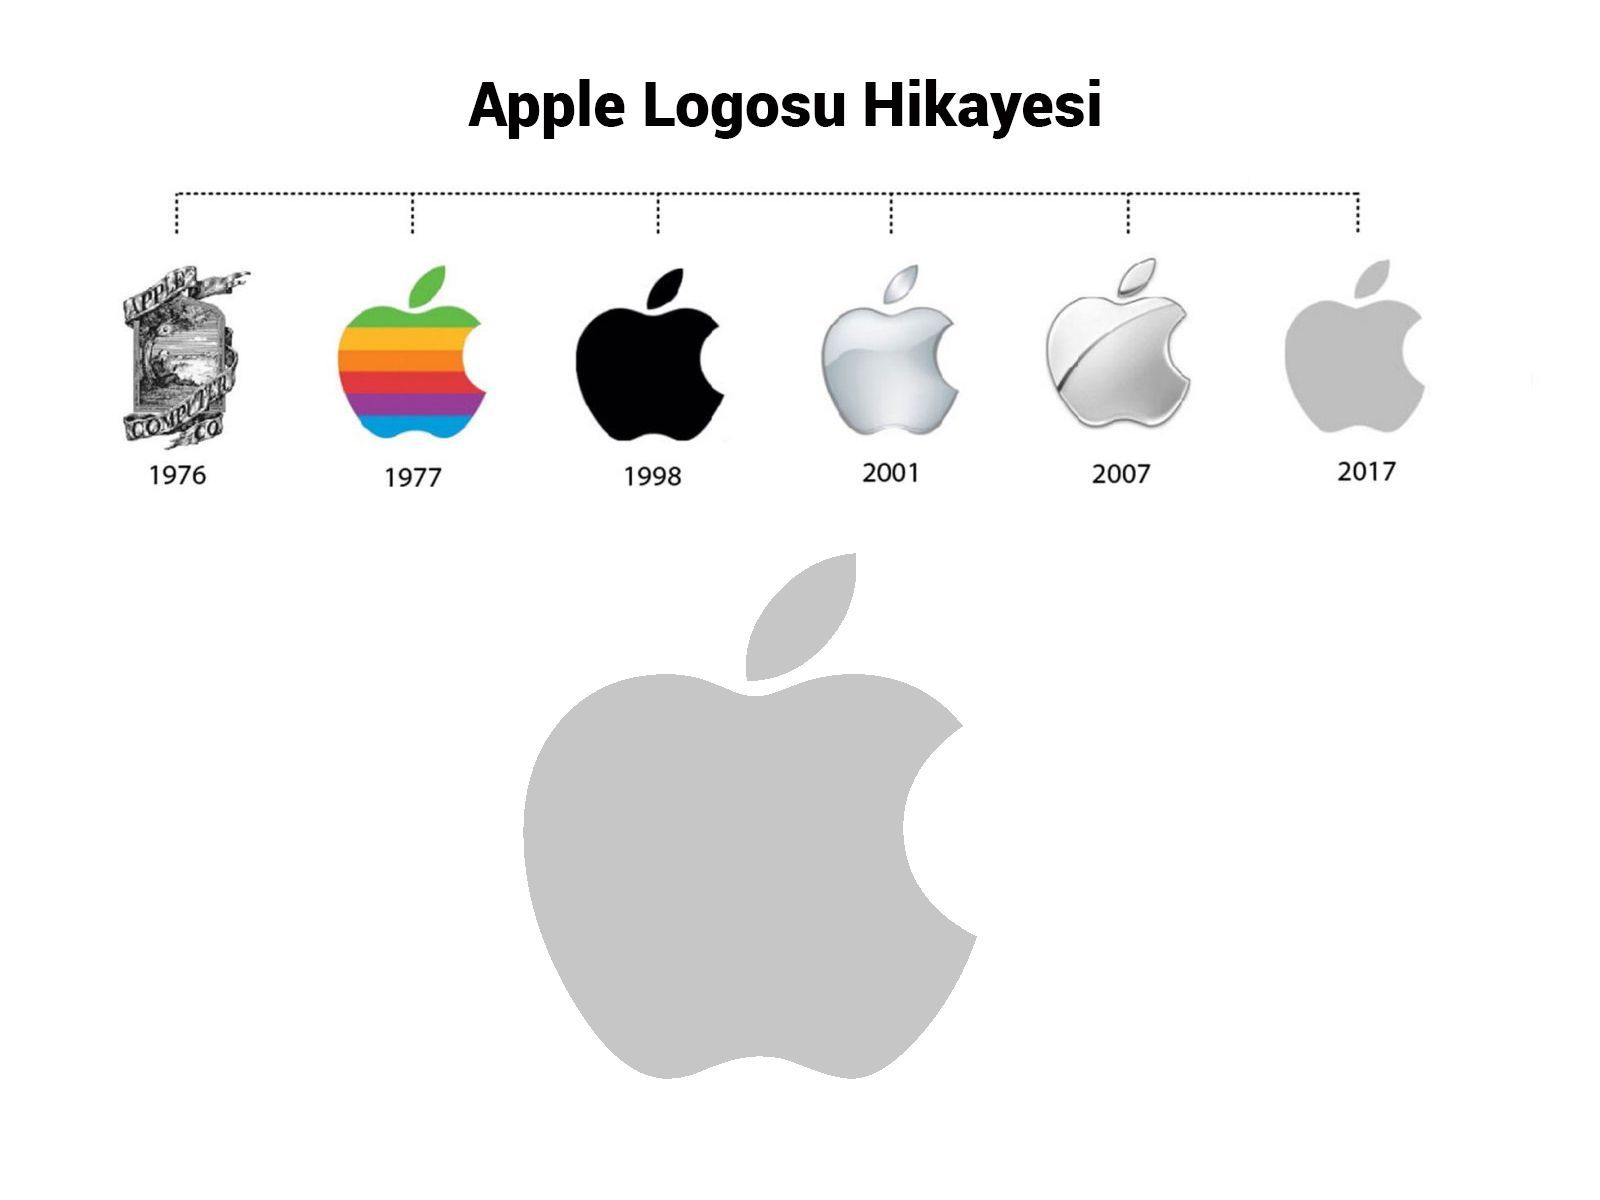 How Apple changed its logo